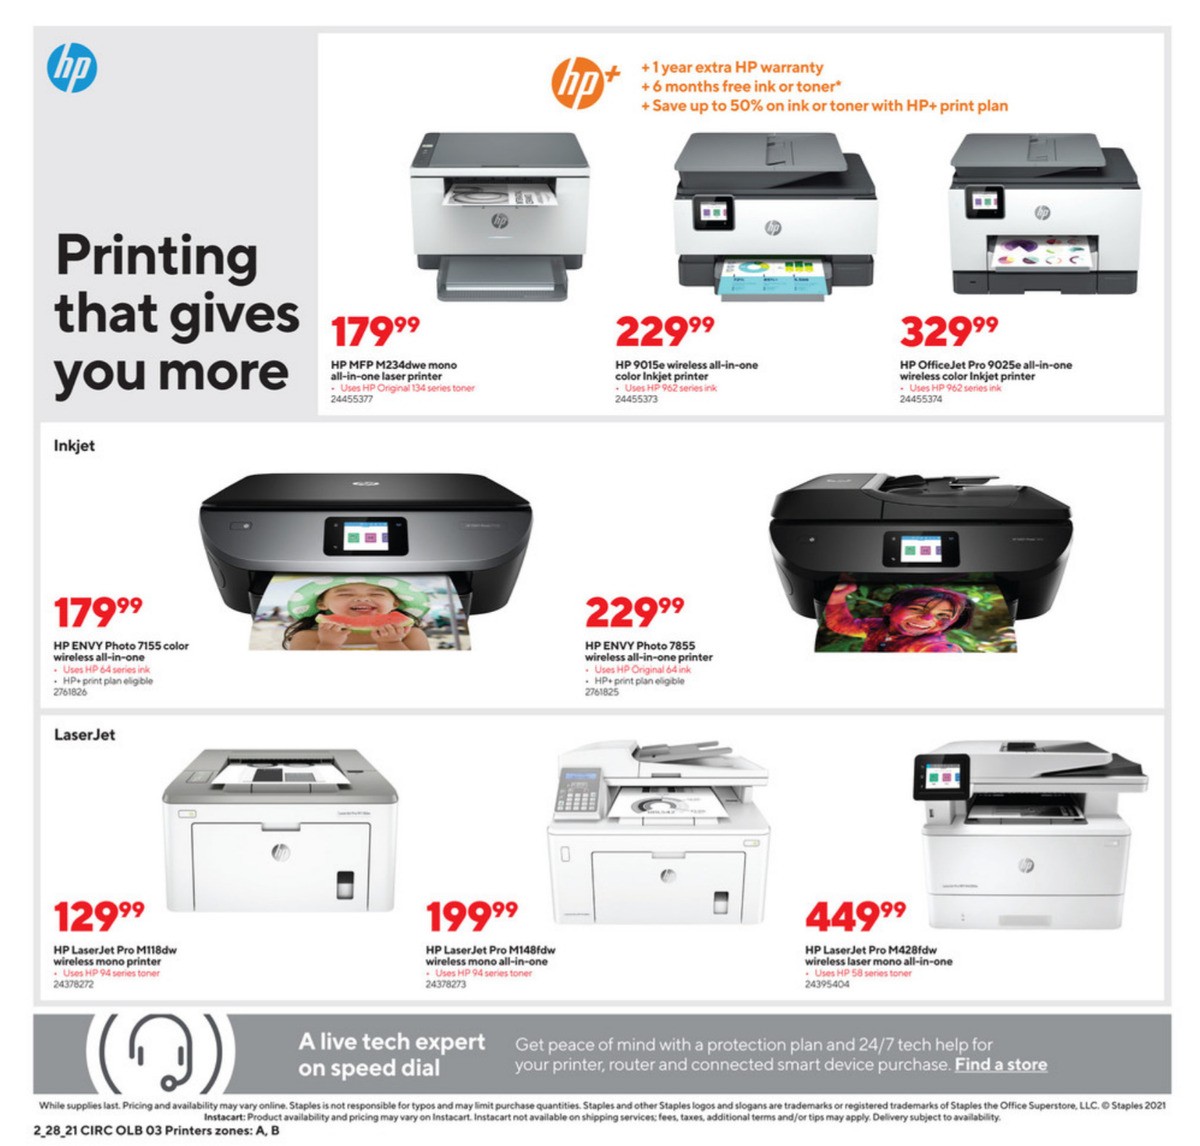 Staples Weekly Ad from February 28